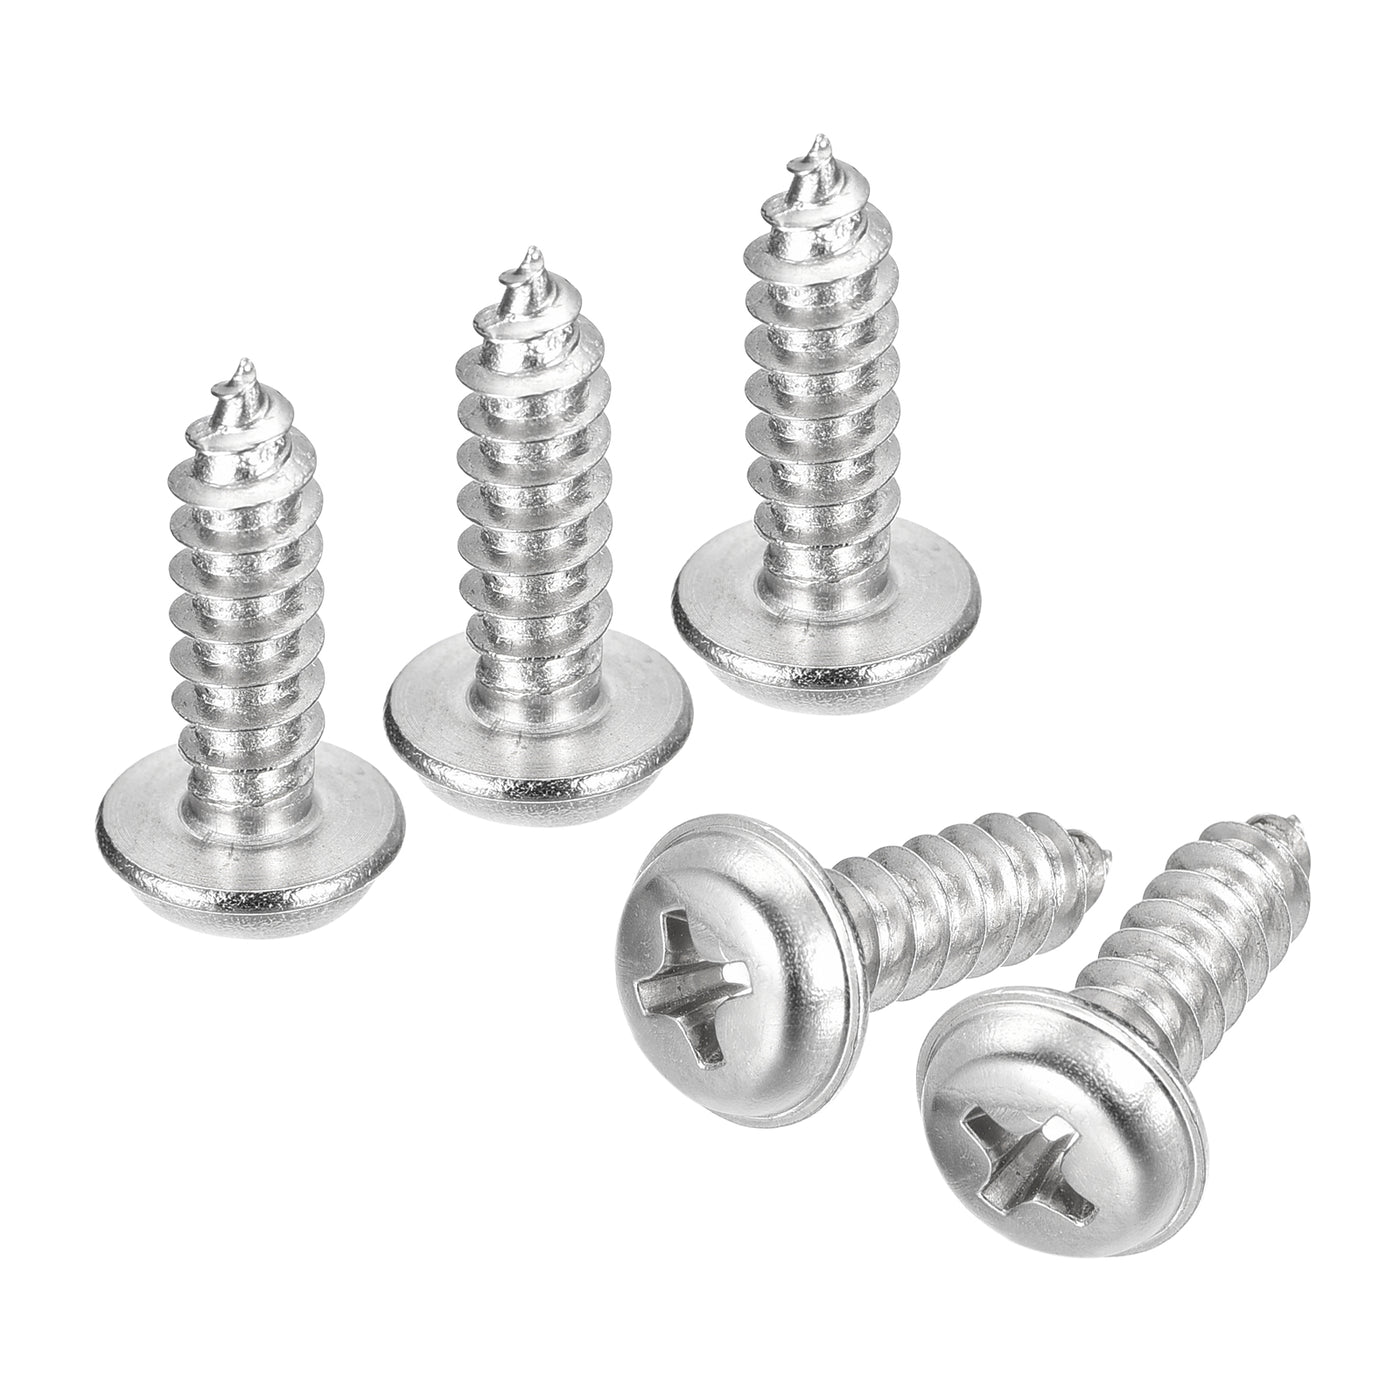 uxcell Uxcell ST5x16mm Phillips Pan Head Self-tapping Screw with Washer, 50pcs - 304 Stainless Steel Wood Screw Full Thread (Silver)